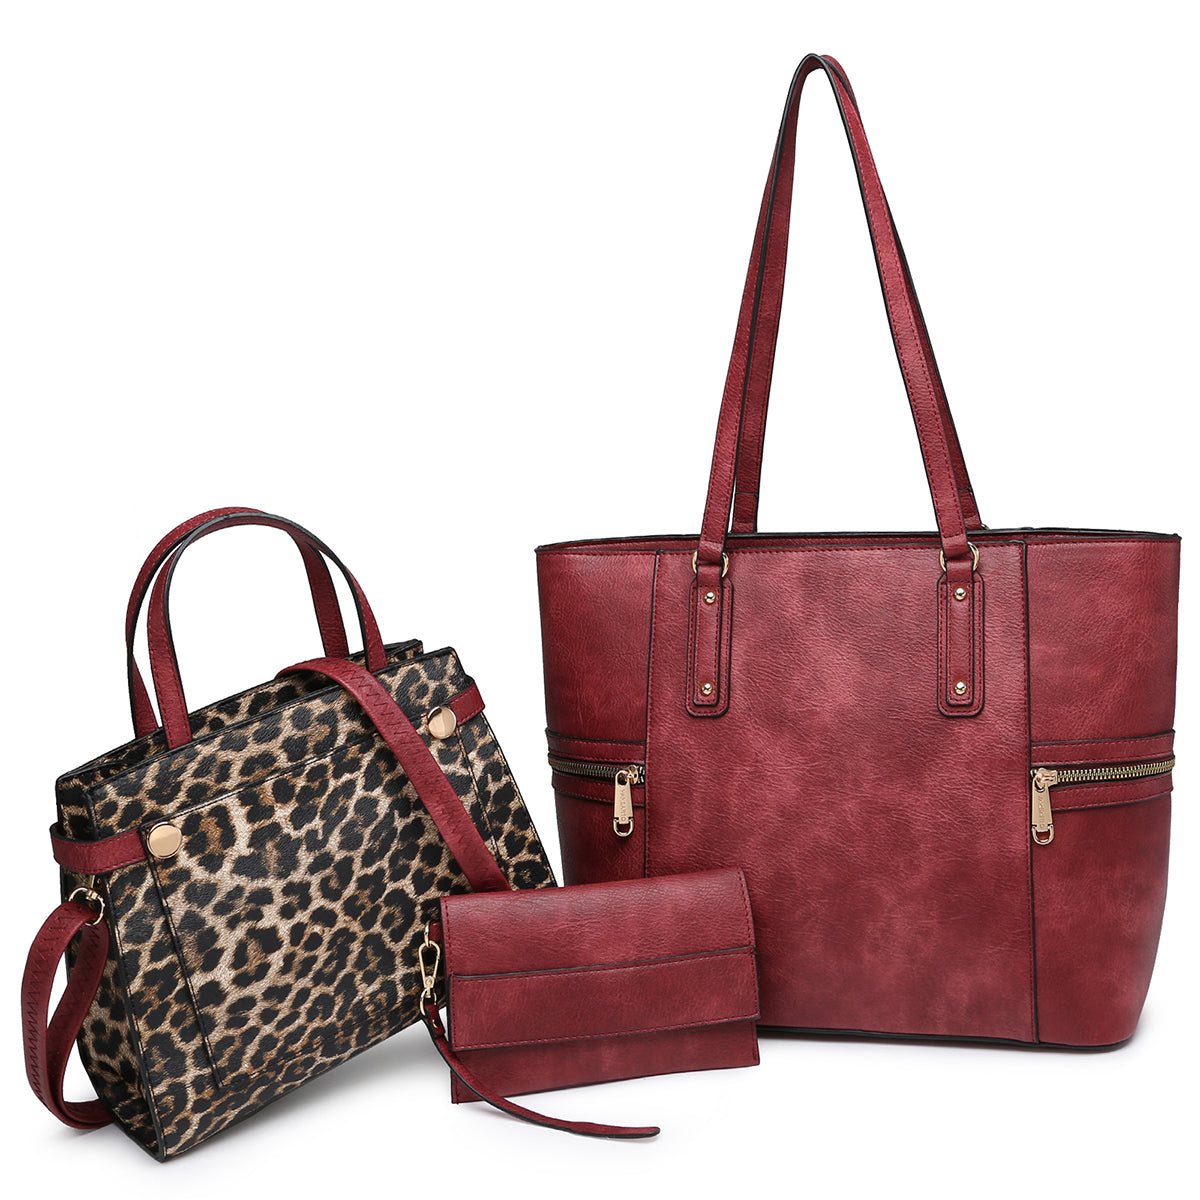 3-in-1 Large Faux Leather Tote Set with Matching Mini Satchel/Messenger Bag and a Wristlet